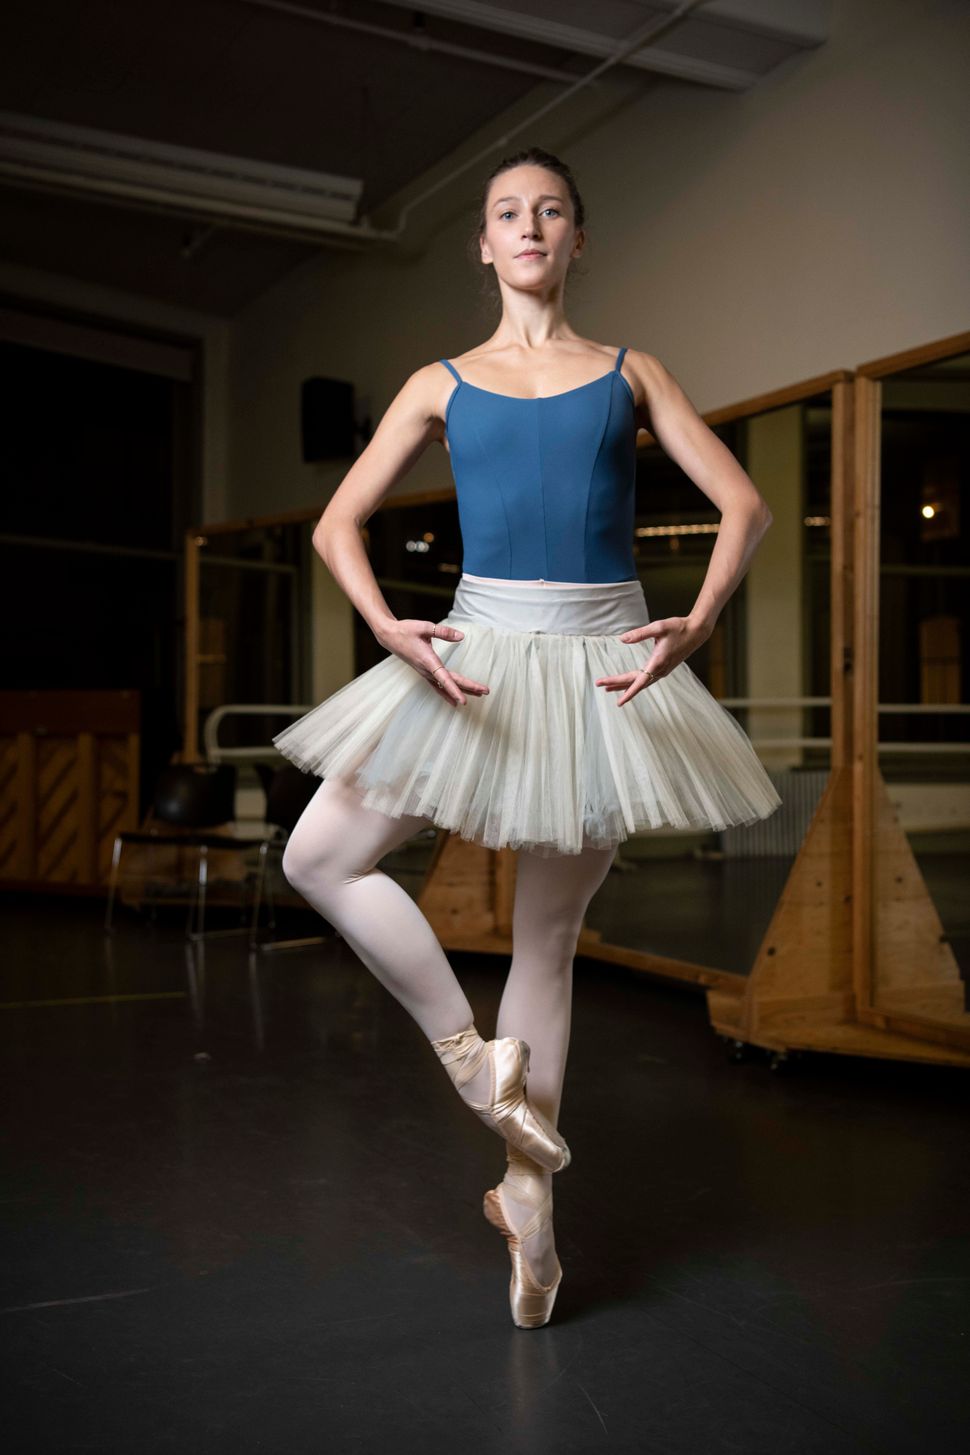 Teuscher poses in her <a href="https://ketodancewear.com/womens/" target="_blank" role="link" class=" js-entry-link cet-external-link" data-vars-item-name="Keto" data-vars-item-type="text" data-vars-unit-name="5db9e7a5e4b066da552b7126" data-vars-unit-type="buzz_body" data-vars-target-content-id="https://ketodancewear.com/womens/" data-vars-target-content-type="url" data-vars-type="web_external_link" data-vars-subunit-name="article_body" data-vars-subunit-type="component" data-vars-position-in-subunit="11">Keto</a> leotard, <a href="https://www.capezio.com/women/tights" target="_blank" role="link" class=" js-entry-link cet-external-link" data-vars-item-name="Capezio pink tights" data-vars-item-type="text" data-vars-unit-name="5db9e7a5e4b066da552b7126" data-vars-unit-type="buzz_body" data-vars-target-content-id="https://www.capezio.com/women/tights" data-vars-target-content-type="url" data-vars-type="web_external_link" data-vars-subunit-name="article_body" data-vars-subunit-type="component" data-vars-position-in-subunit="12">Capezio pink tights</a>, <a href="http://us.blochworld.com/product/S0104L" target="_blank" role="link" class=" js-entry-link cet-external-link" data-vars-item-name="Bloch Alpha pointe shoes" data-vars-item-type="text" data-vars-unit-name="5db9e7a5e4b066da552b7126" data-vars-unit-type="buzz_body" data-vars-target-content-id="http://us.blochworld.com/product/S0104L" data-vars-target-content-type="url" data-vars-type="web_external_link" data-vars-subunit-name="article_body" data-vars-subunit-type="component" data-vars-position-in-subunit="13">Bloch Alpha pointe shoes</a> and a practice tutu that was handed down to her by fellow principal <a href="https://www.abt.org/people/gillian-murphy/" target="_blank" role="link" class=" js-entry-link cet-external-link" data-vars-item-name="Gillian Murphy" data-vars-item-type="text" data-vars-unit-name="5db9e7a5e4b066da552b7126" data-vars-unit-type="buzz_body" data-vars-target-content-id="https://www.abt.org/people/gillian-murphy/" data-vars-target-content-type="url" data-vars-type="web_external_link" data-vars-subunit-name="article_body" data-vars-subunit-type="component" data-vars-position-in-subunit="14">Gillian Murphy</a>.